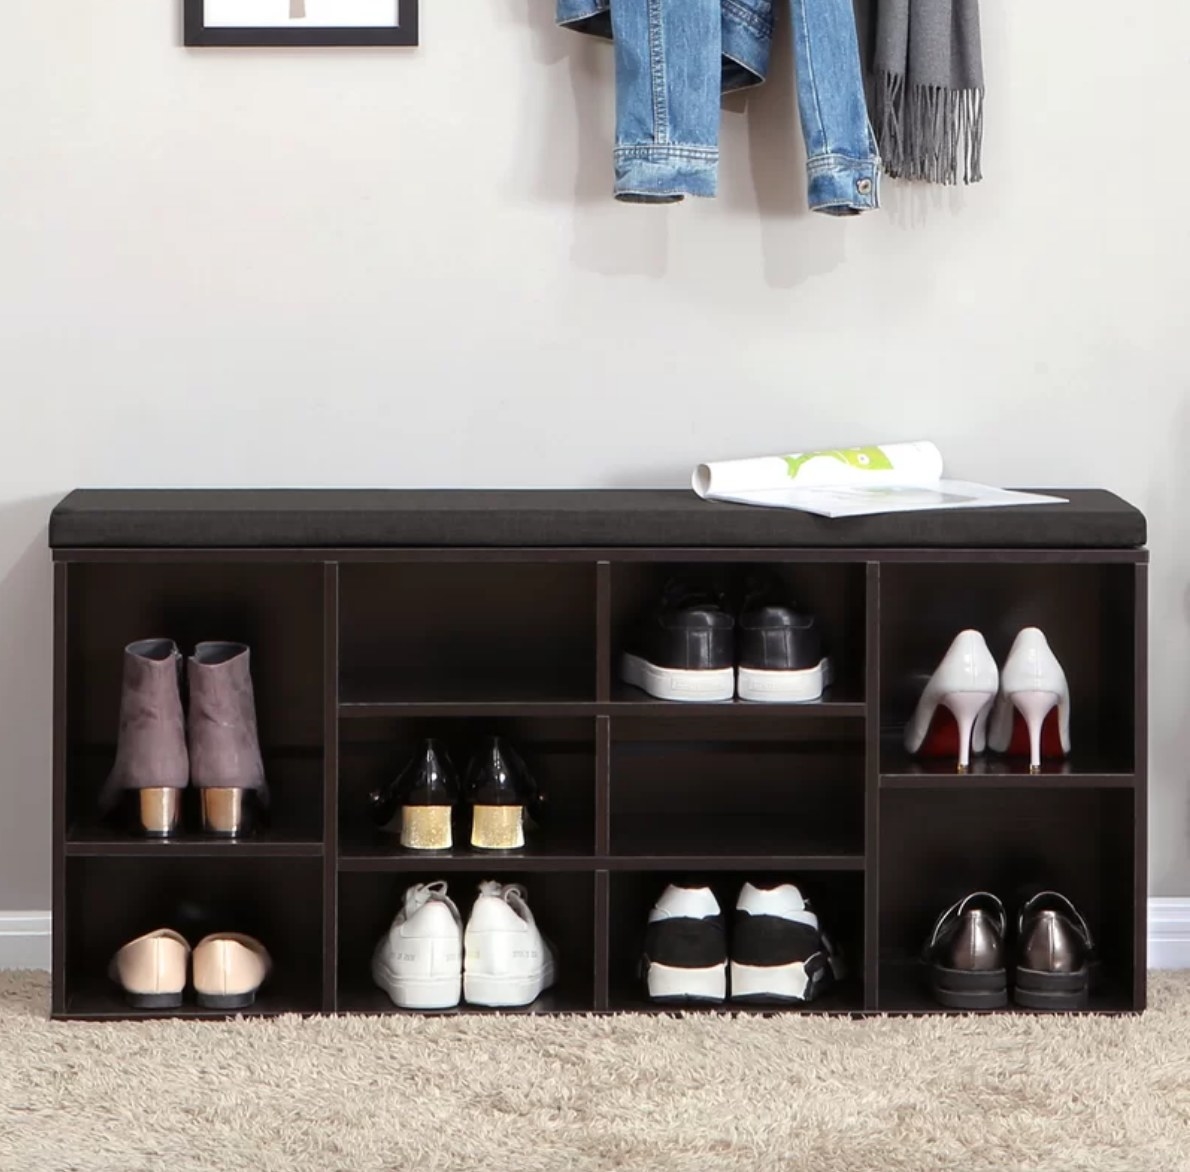 Dark brown shoe bench with shoes in underneath cubbies, black cushioned bench top